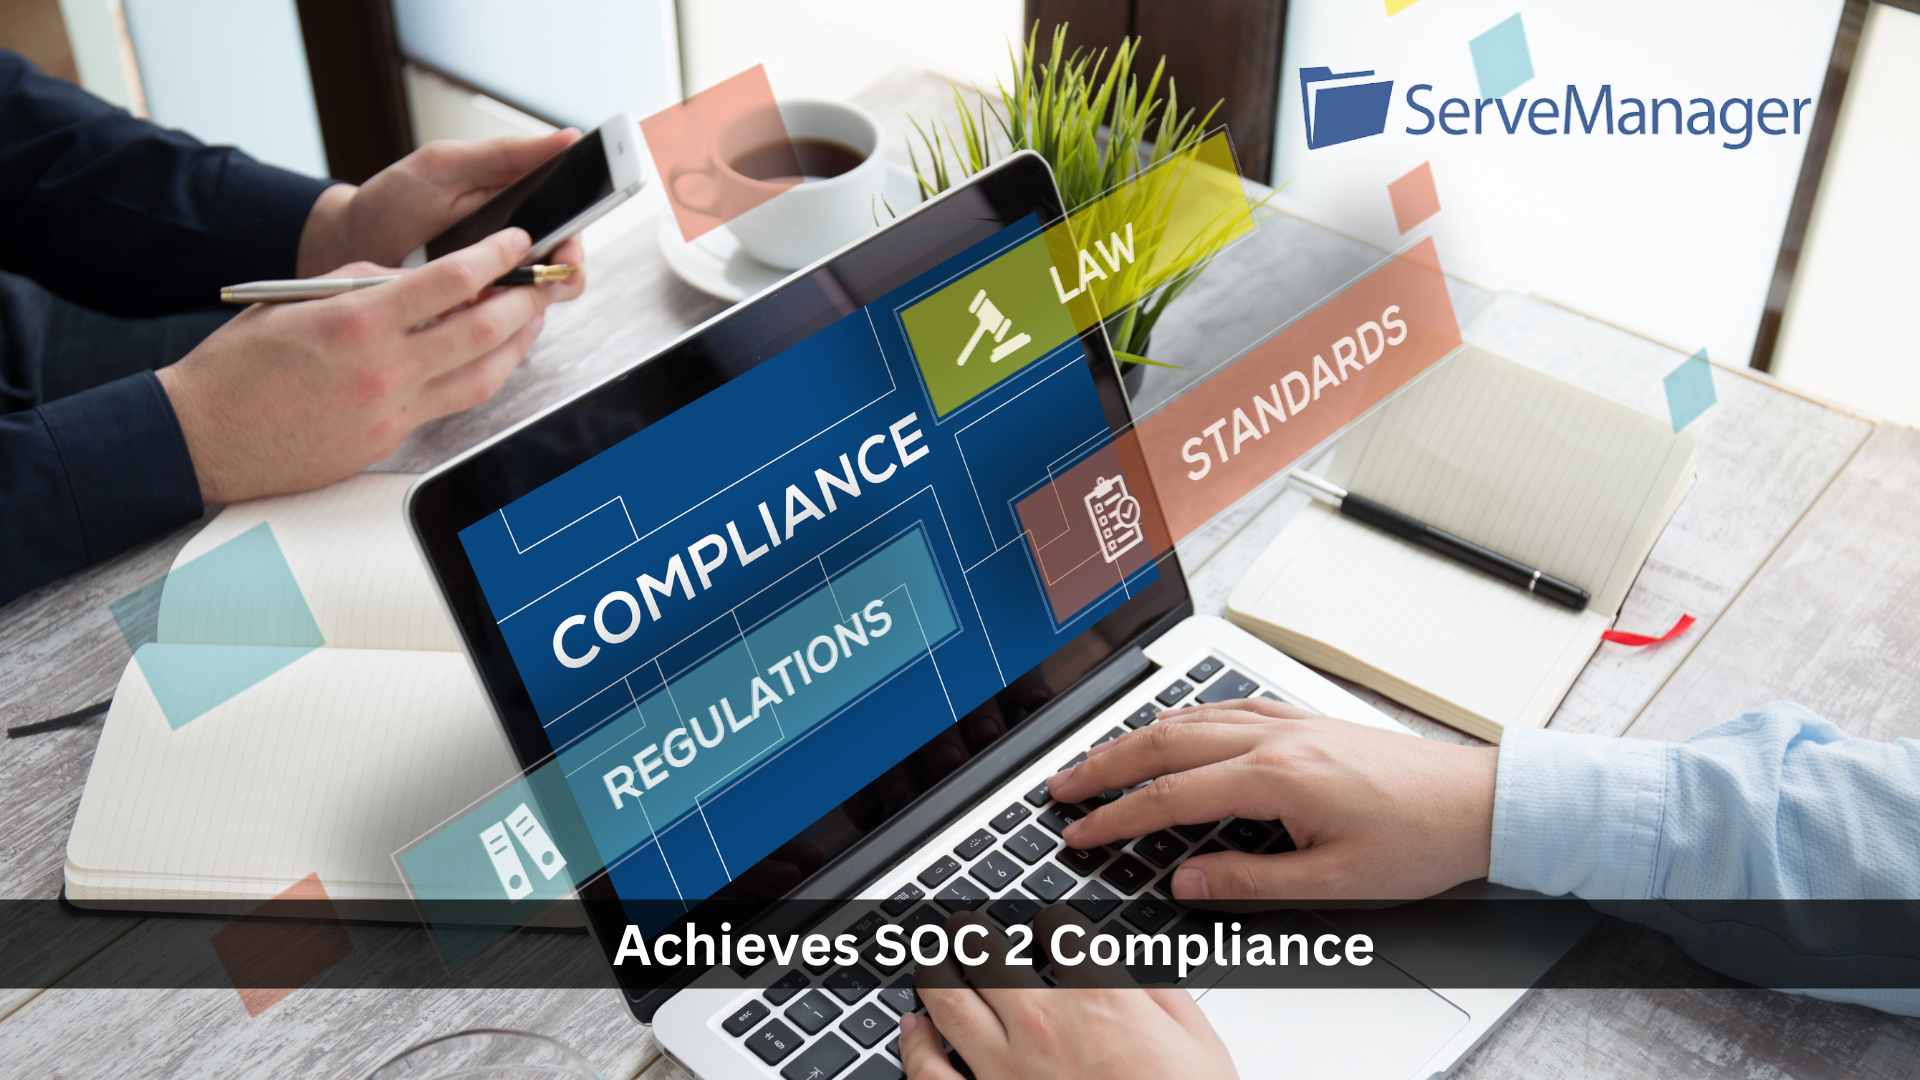 ServeManager Achieves SOC 2 Compliance, Enhancing Data Security for Legal Professionals